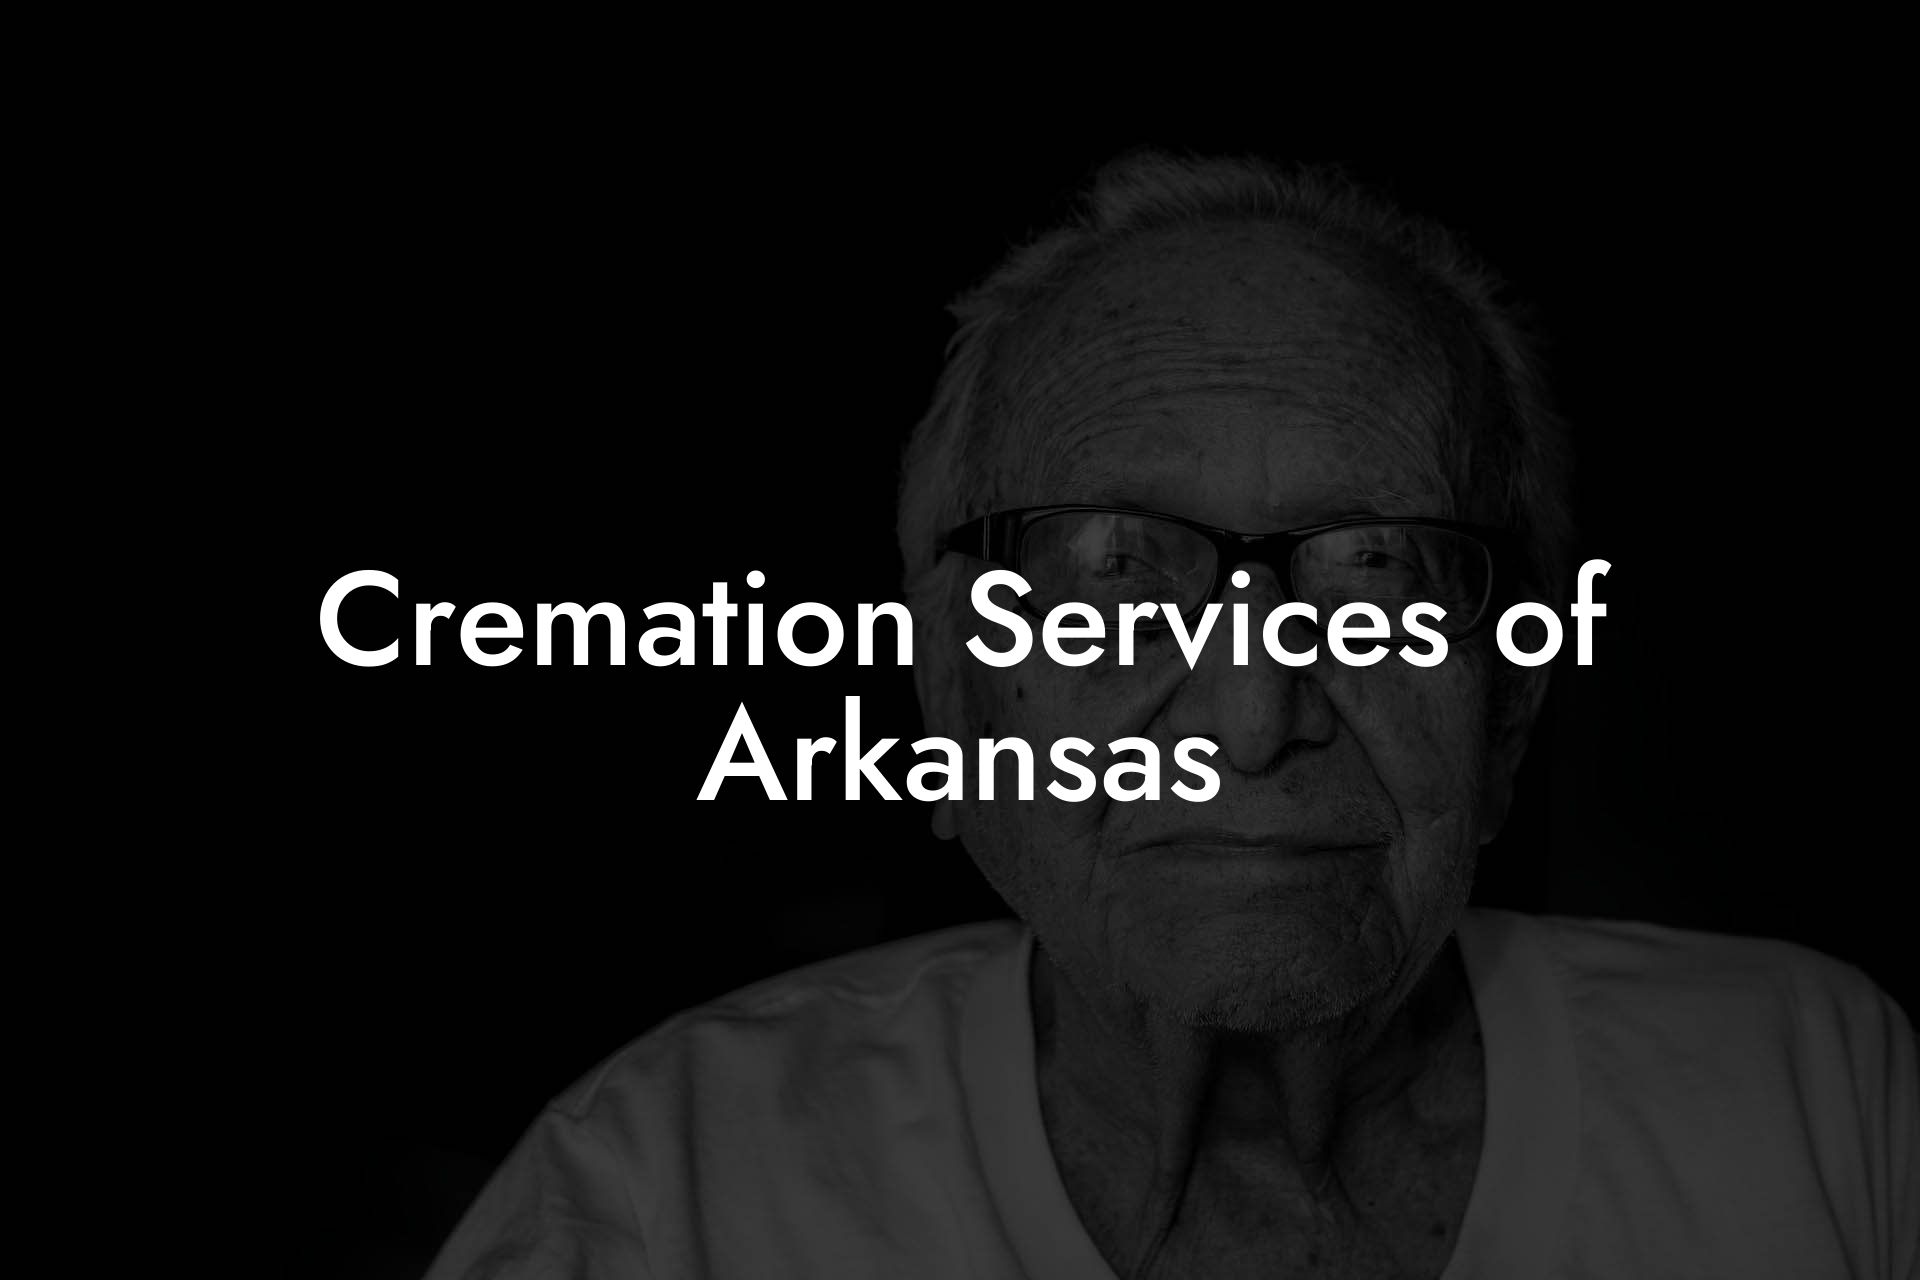 Cremation Services of Arkansas